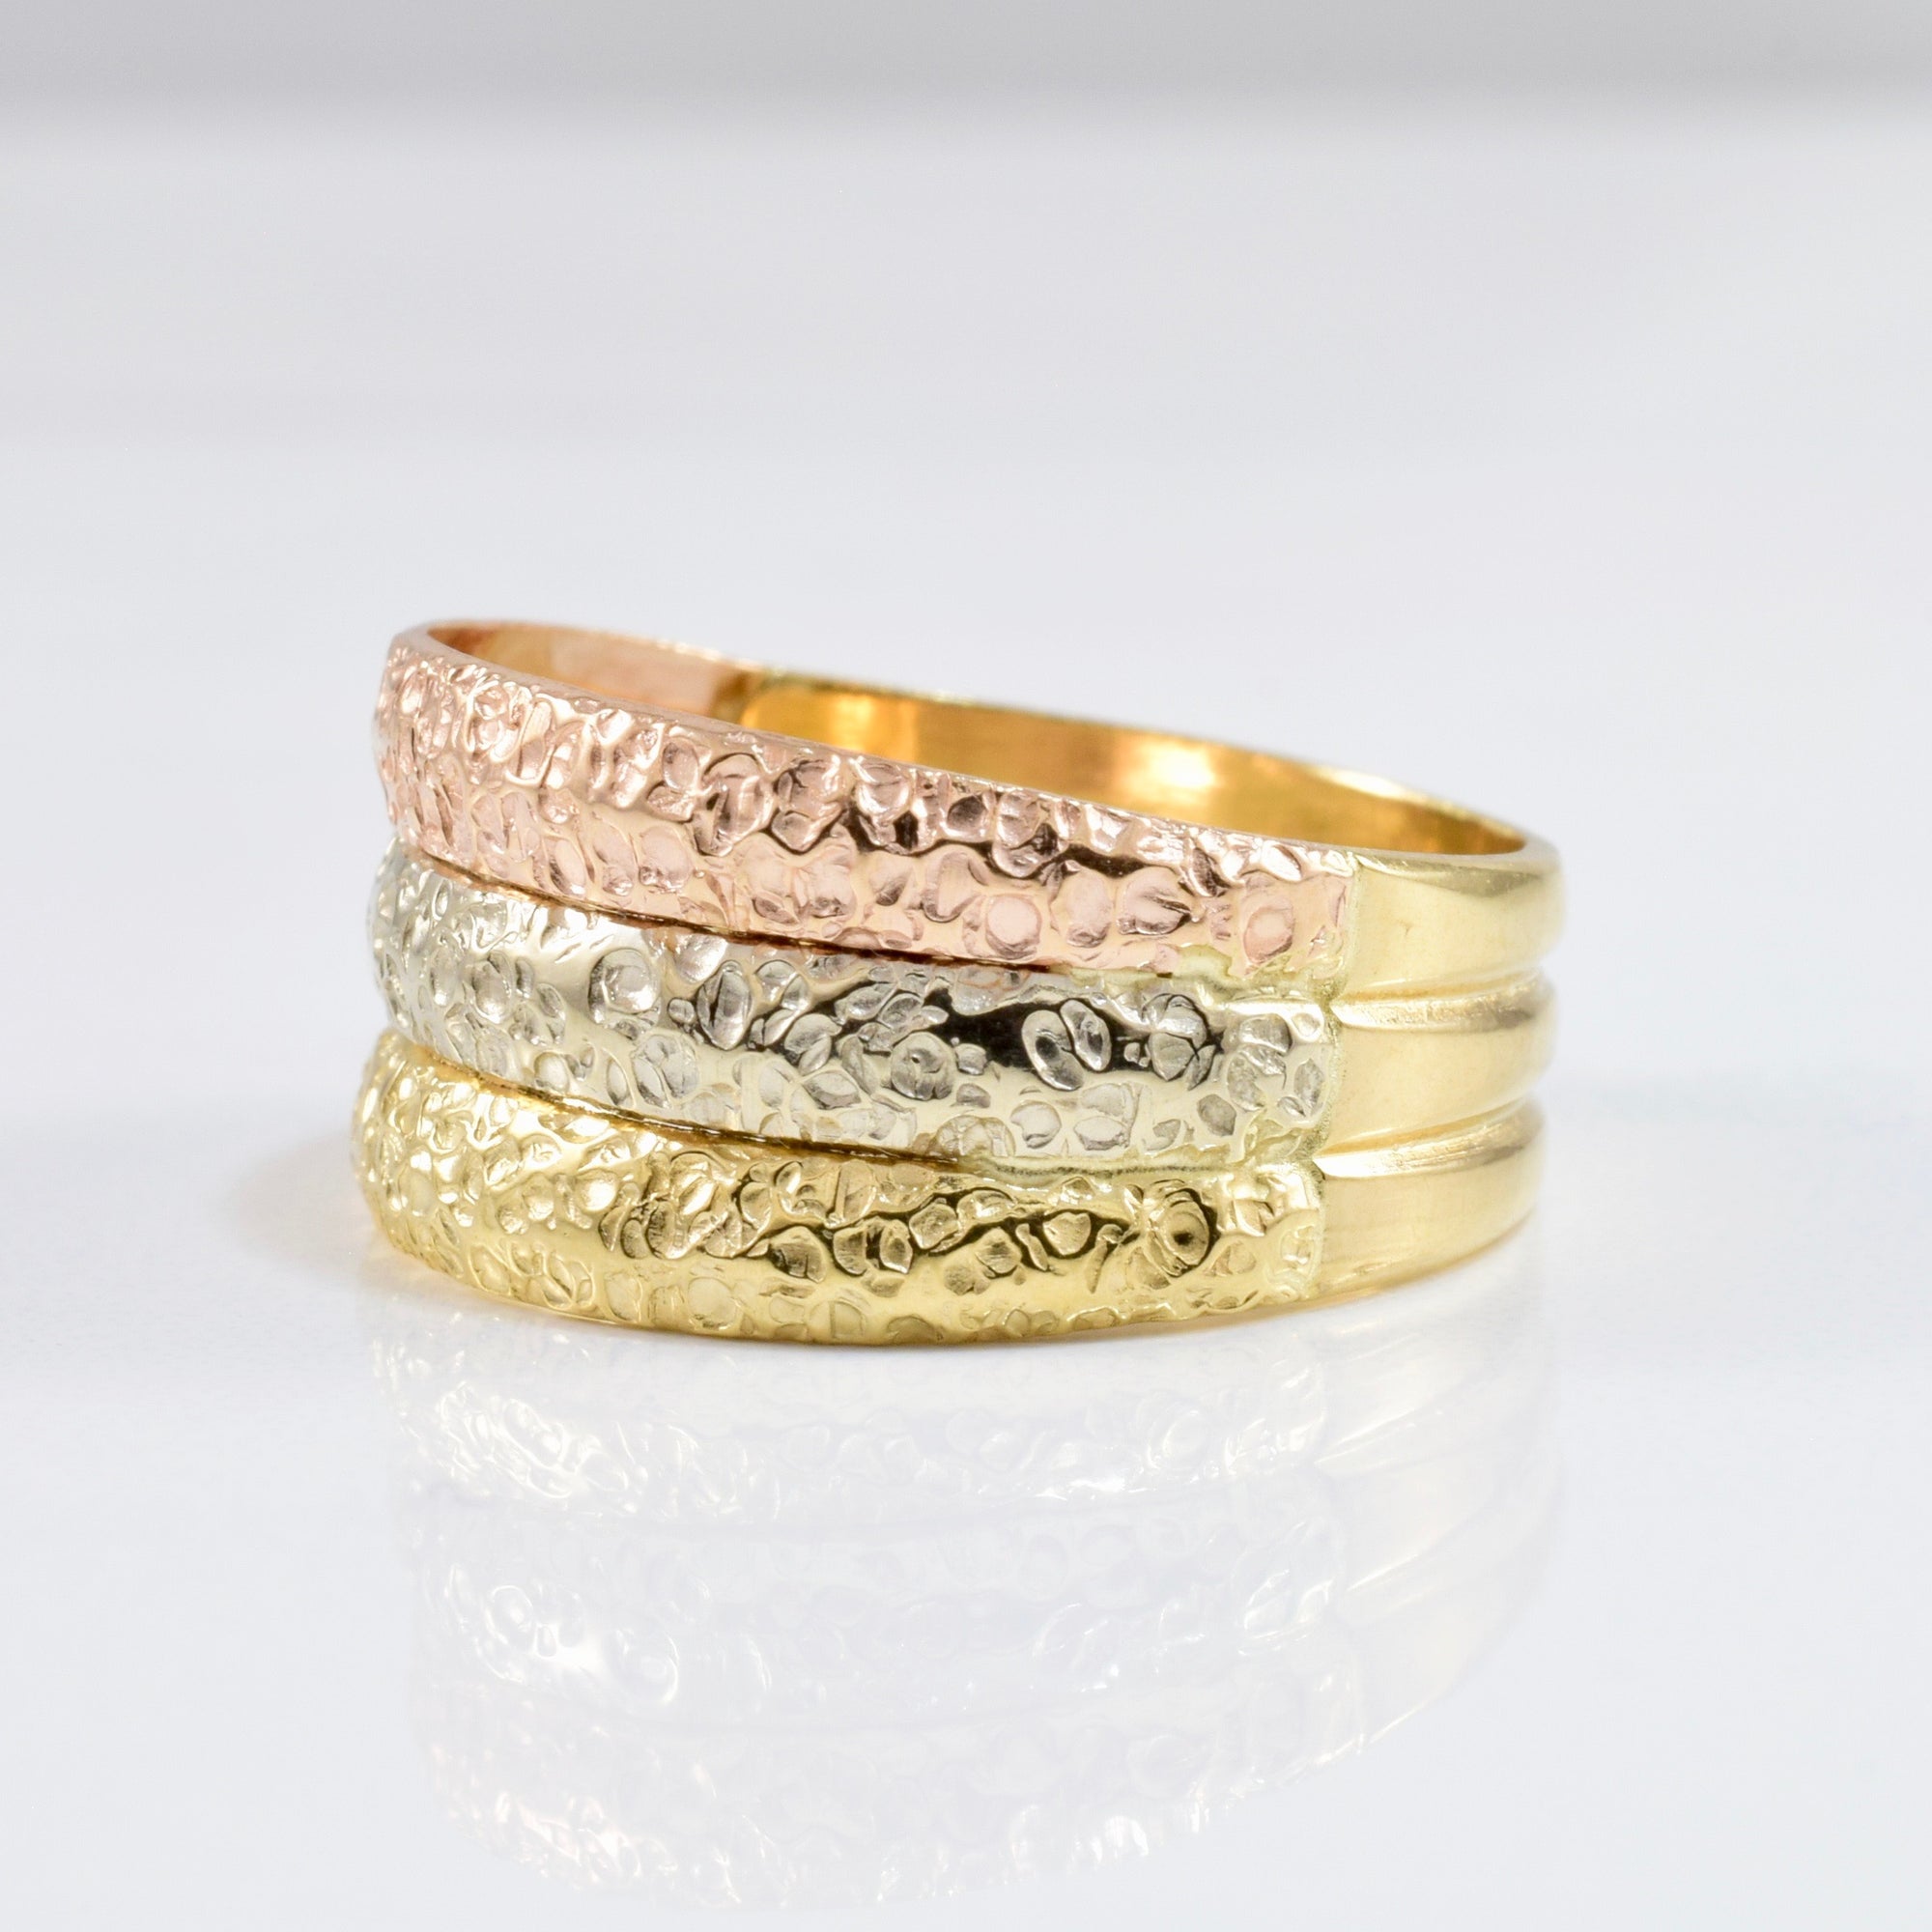 Hammered Tri Coloured Gold Band | SZ 8.75 |